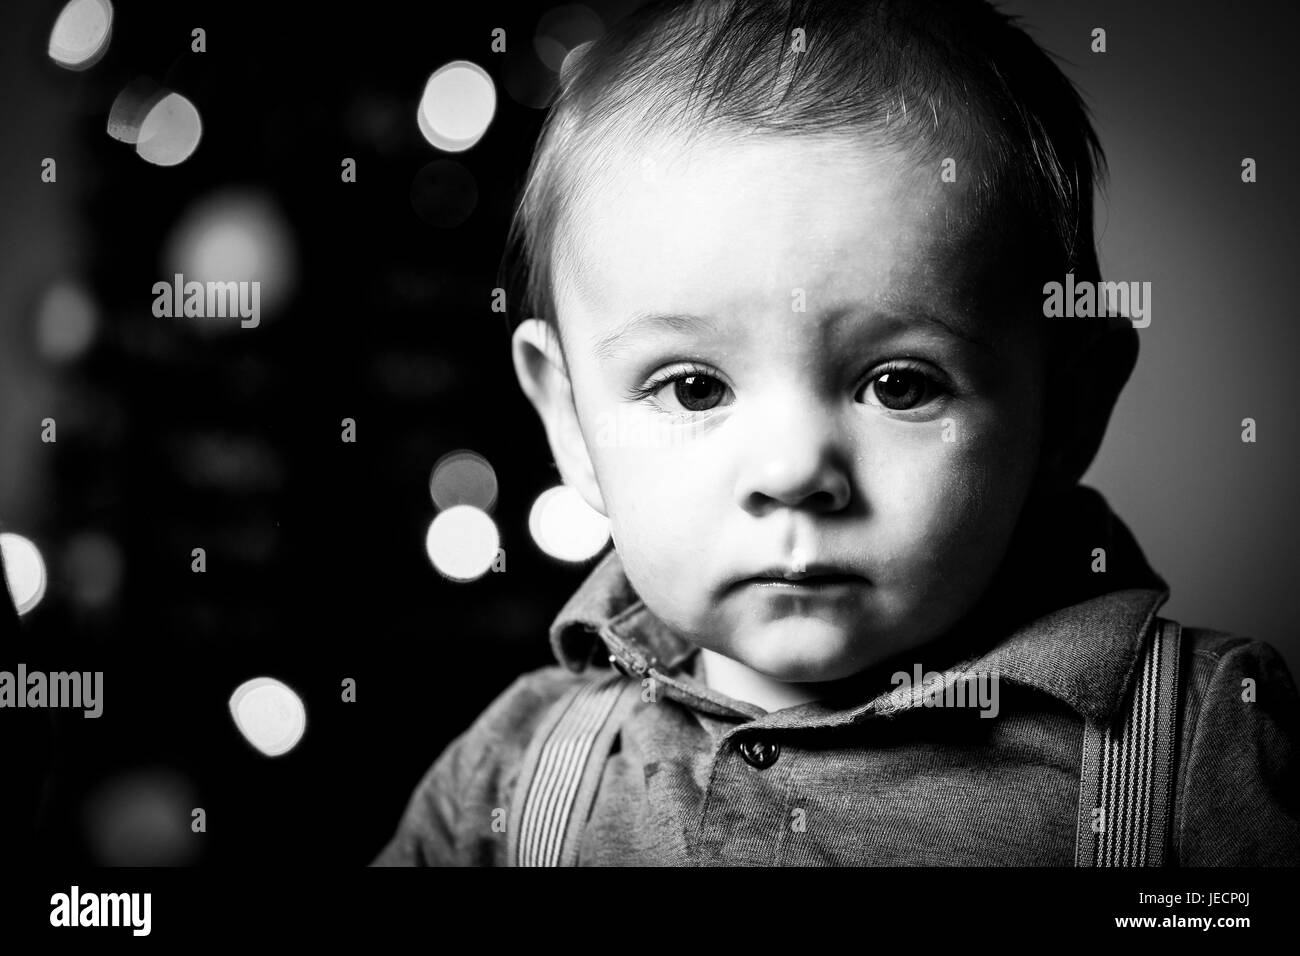 Baby boy portrait in black and white at six months old Stock Photo